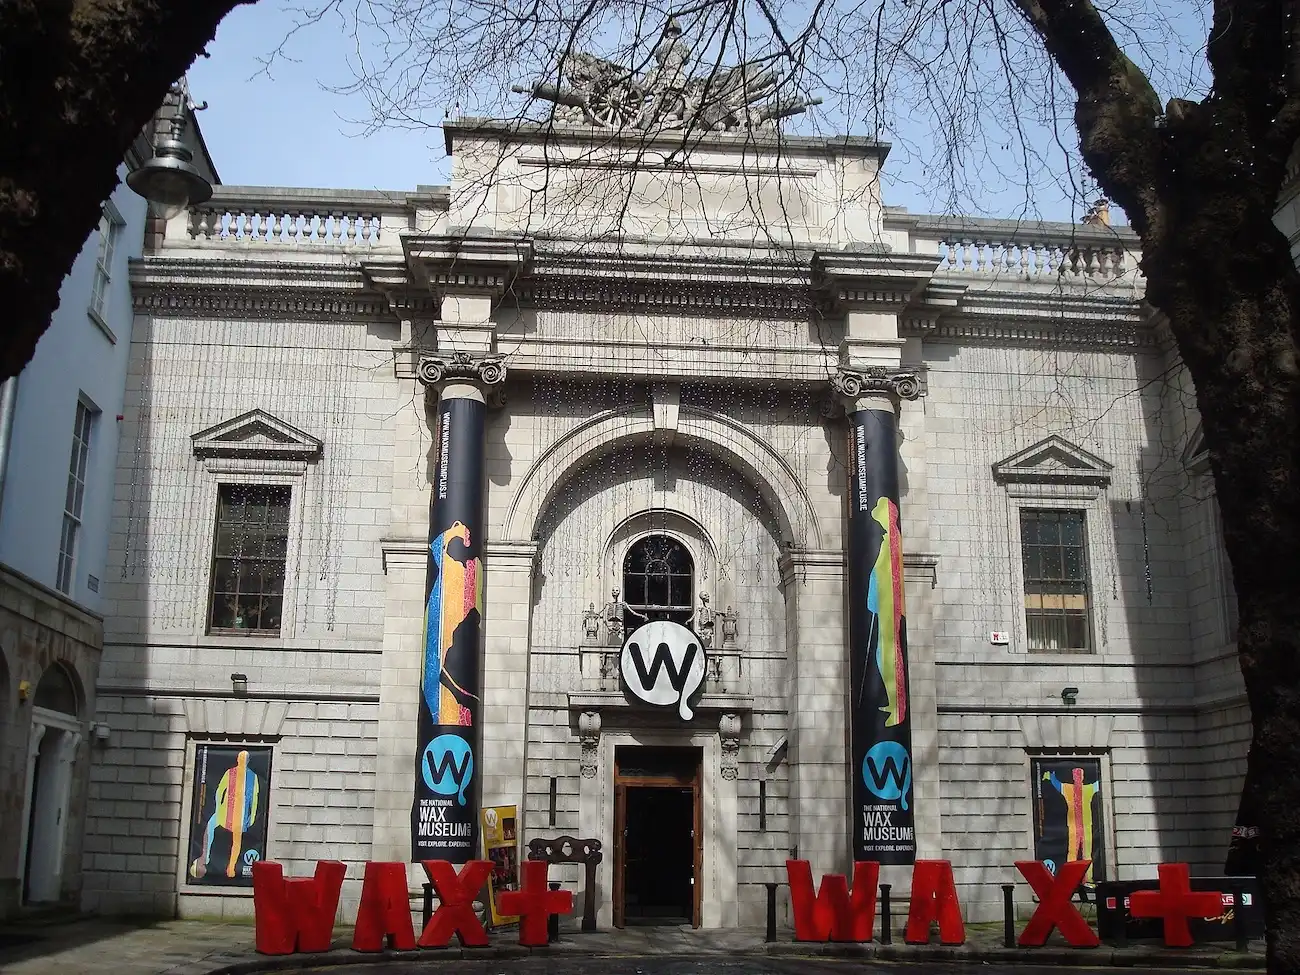 Entrance building of the National Wax Museum Plus in Dublin, Ireland.